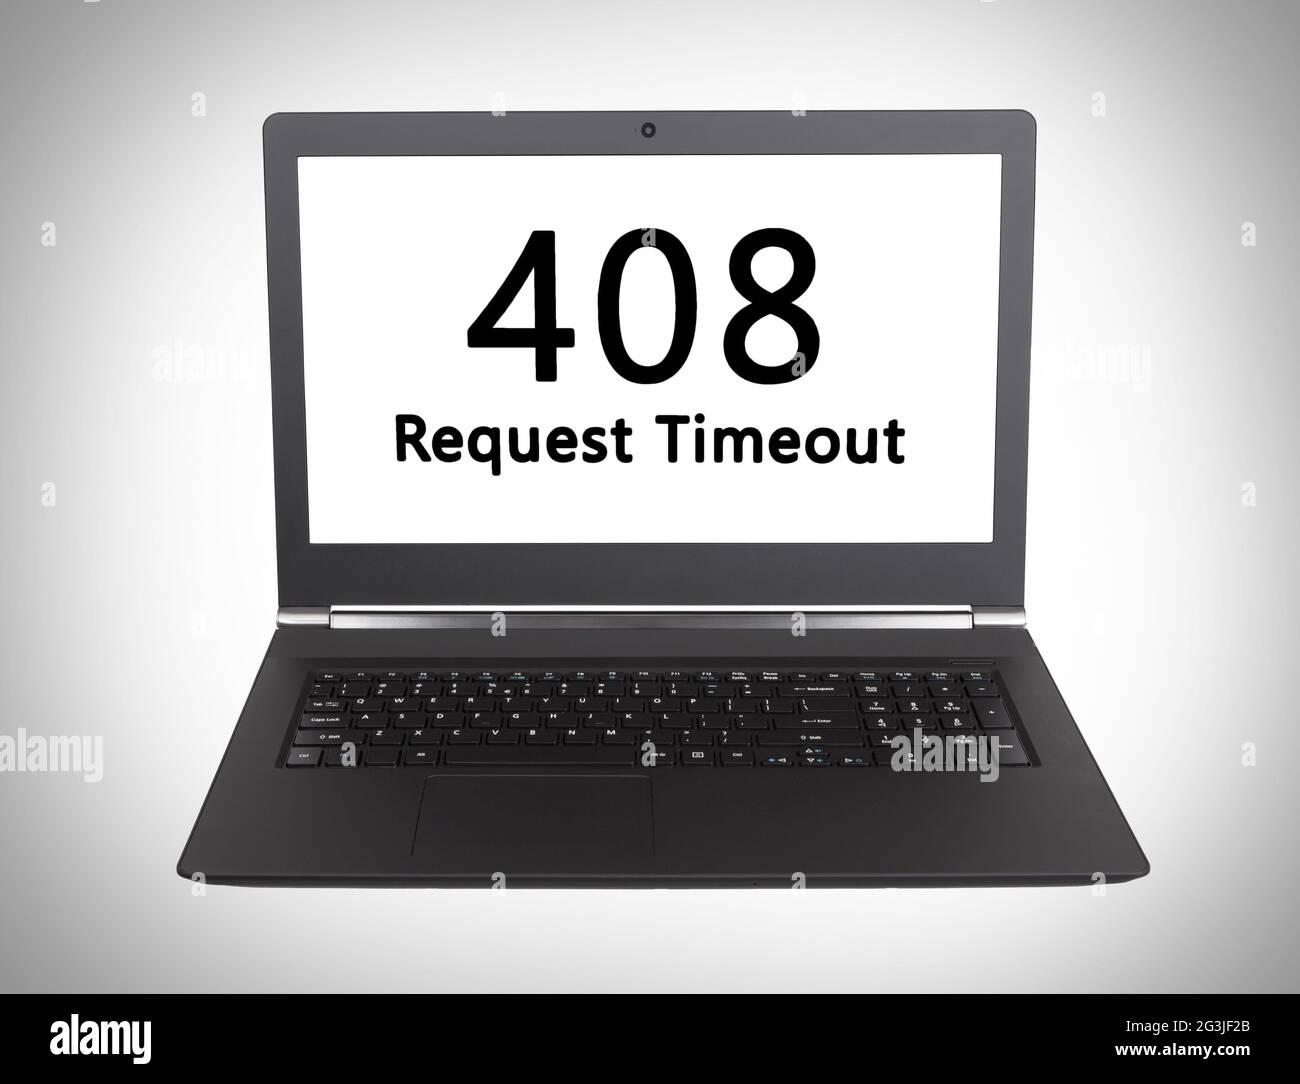 http-status-code-408-request-timeout-stock-photo-alamy